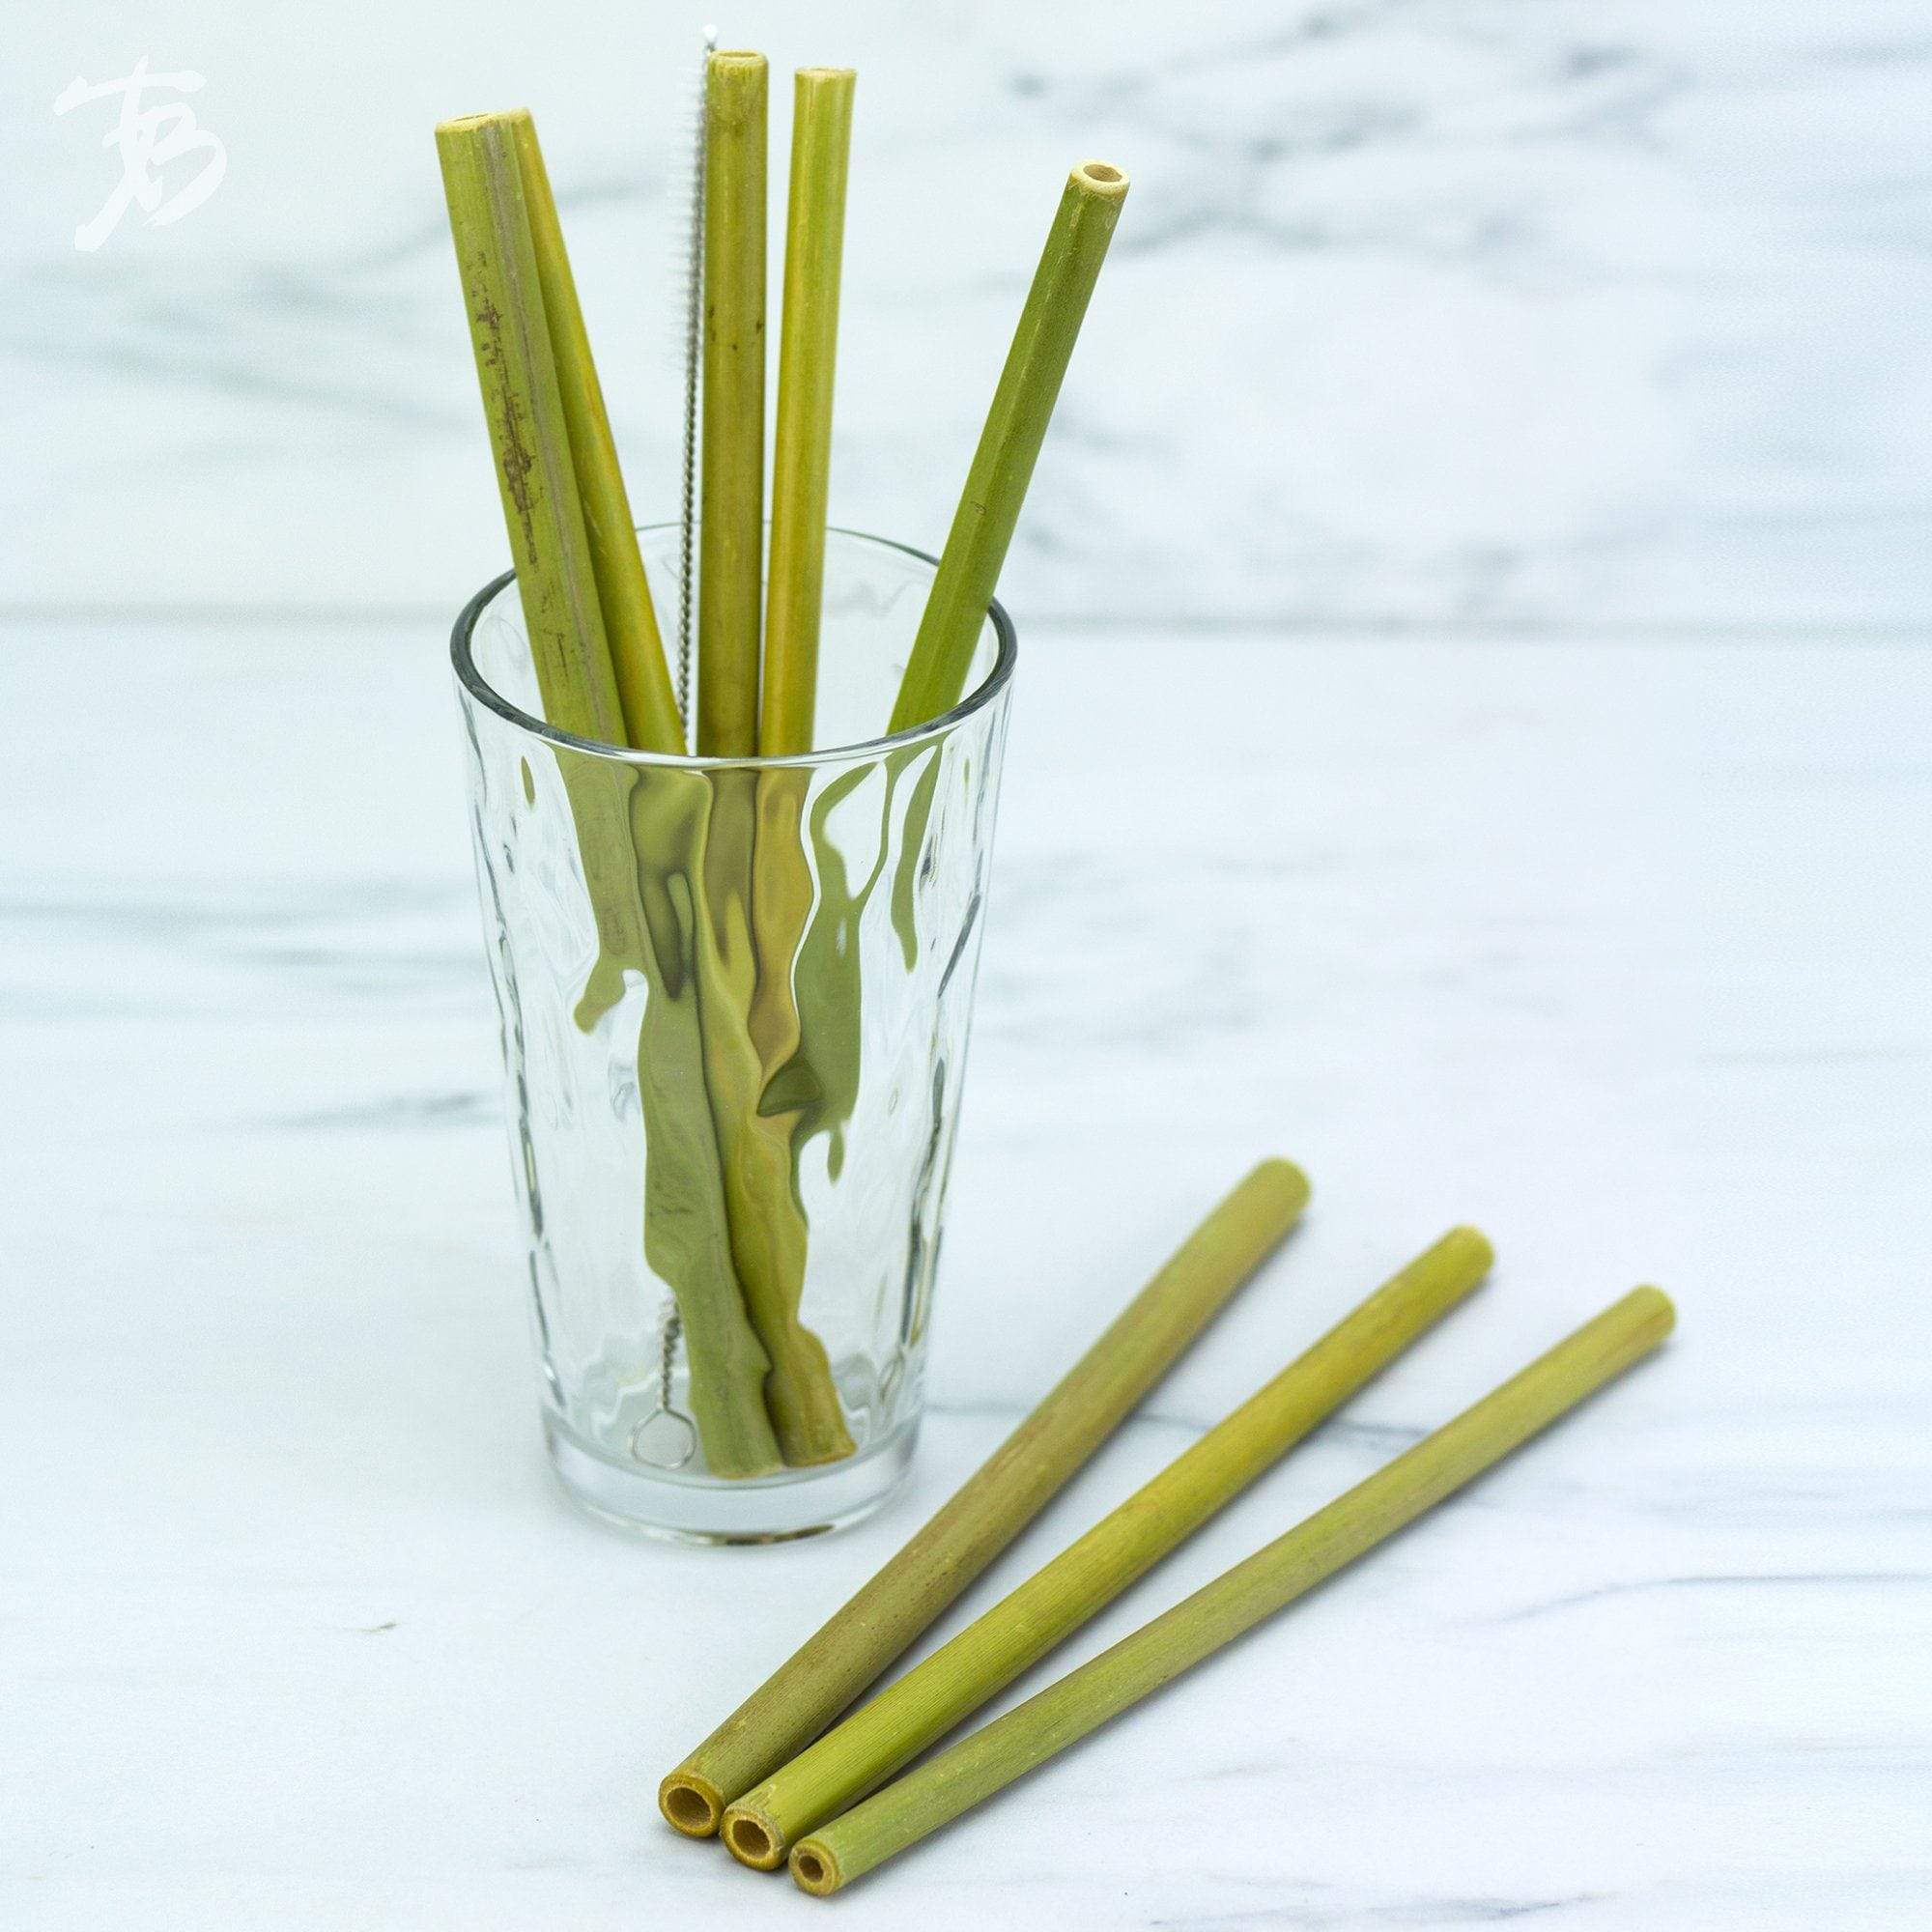 Totally Bamboo 8-Pack Reusable Bamboo Drinking Straws, Dishwasher Safe